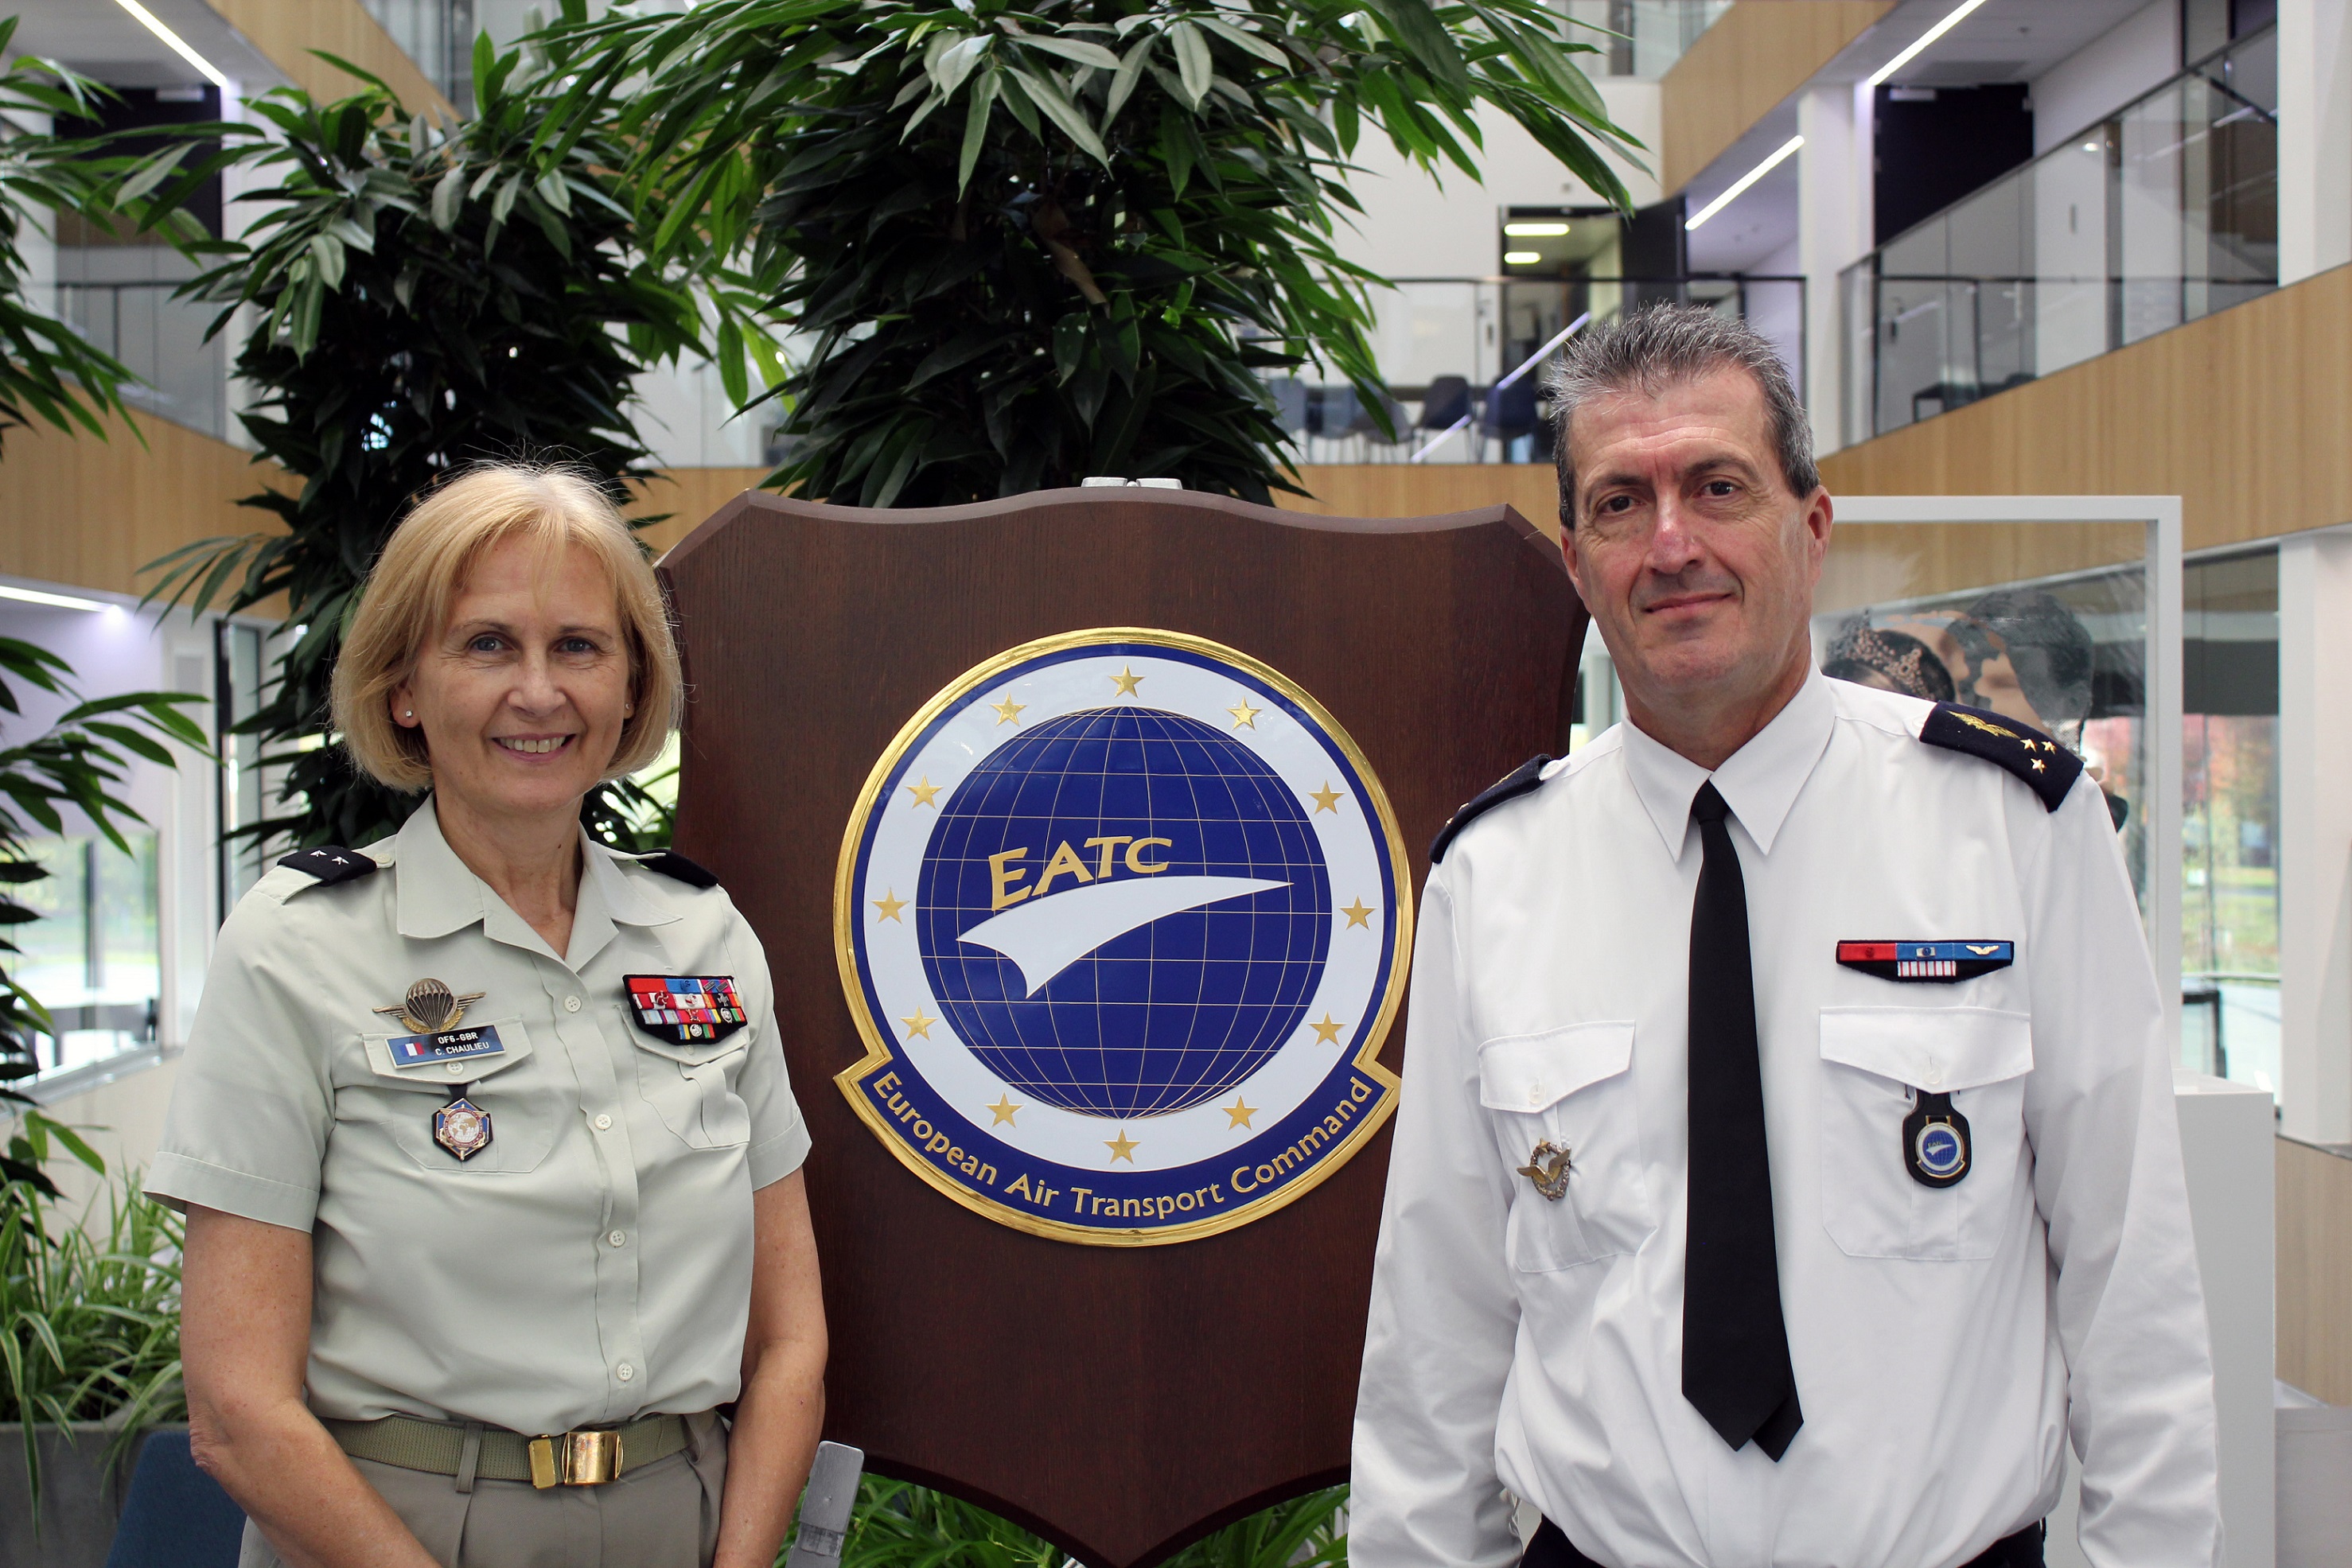 The French Deputy Military Representative to the EUMC meets the Commander EATC